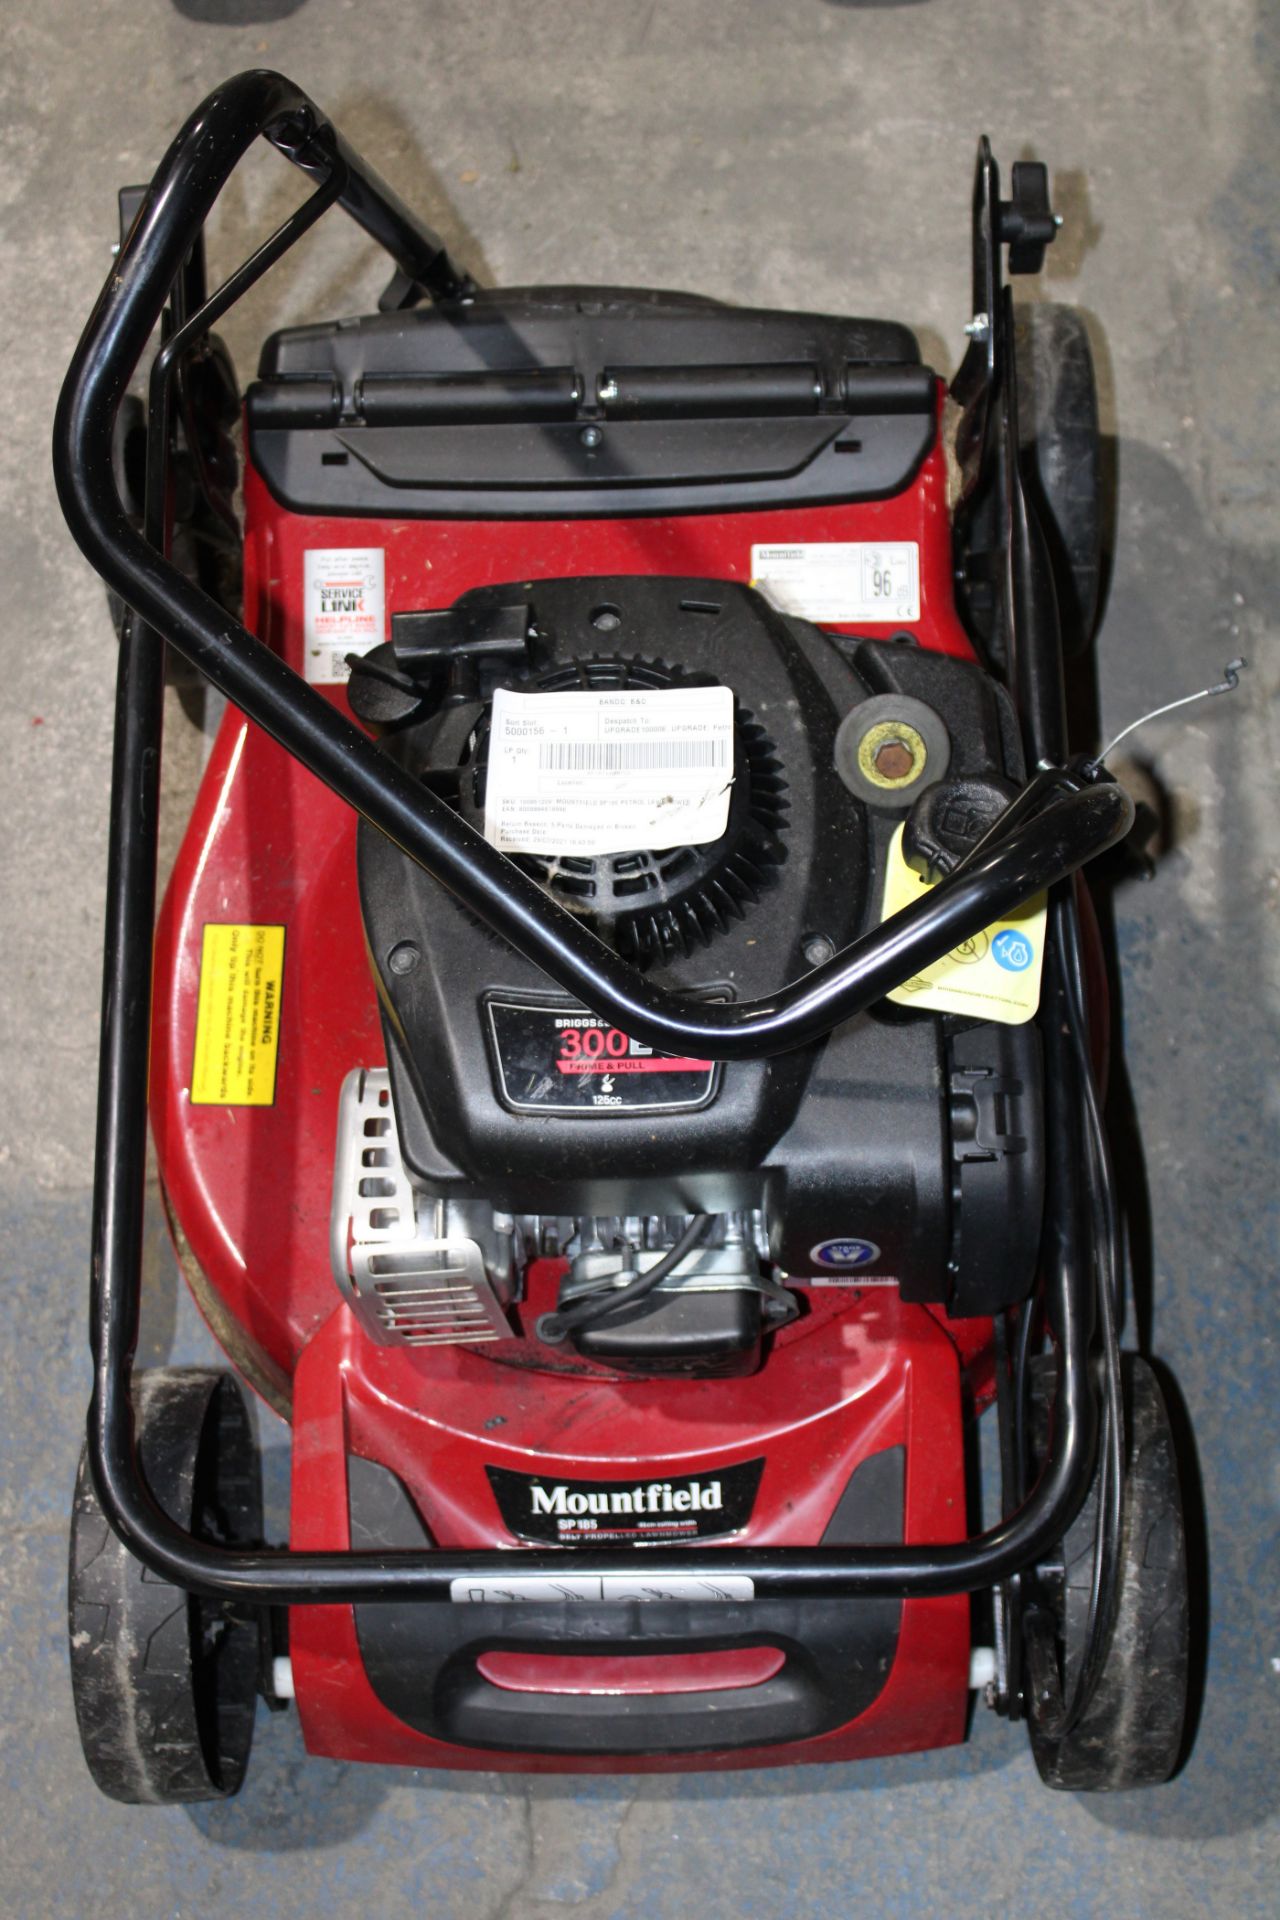 MOUNTFIELD SP185 PETROL LAWNMOWER £322.84Condition ReportAppraisal Available on Request- All Items